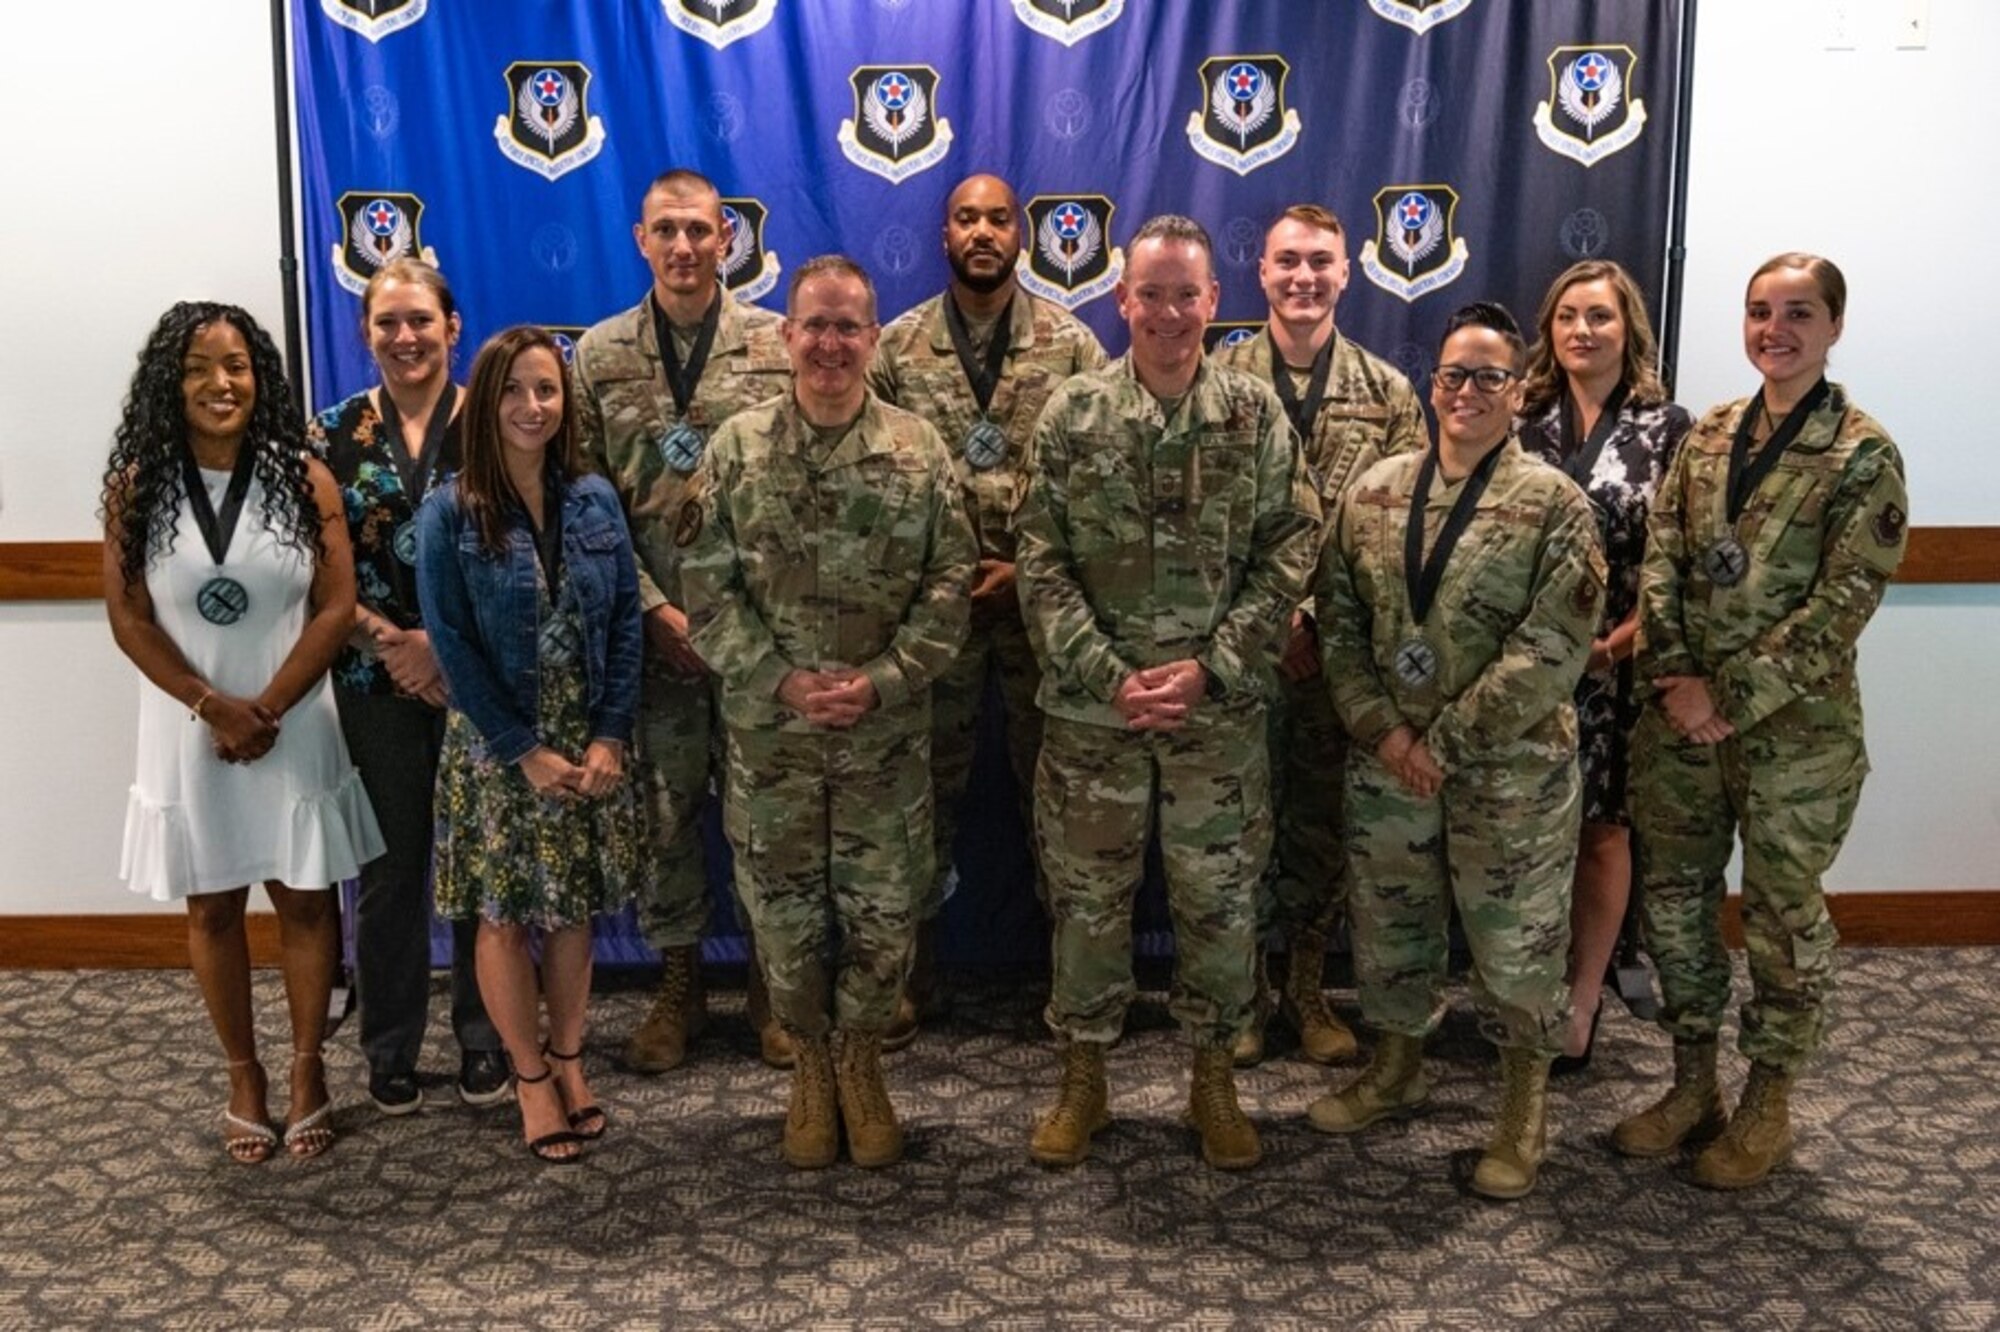 Air Force Special Operations Command’s 2021 Outstanding Airman of the Year pose for a photo with U.S. Air Force Lt. Gen. Jim Slife, commander of AFSOC, and Chief Master Sgt. Cory Olson, command chief of AFSOC, at the conclusion of the OAY Medallion breakfast at Hurlburt Field, Florida, May 11, 2022. In addition to the medallion breakfast, AFSOC formally recognized this year’s Outstanding Airmen of the Year award winners with a day of professional development events and a banquet (U.S. Air Force photo by Staff Sgt. Miranda Mahoney)